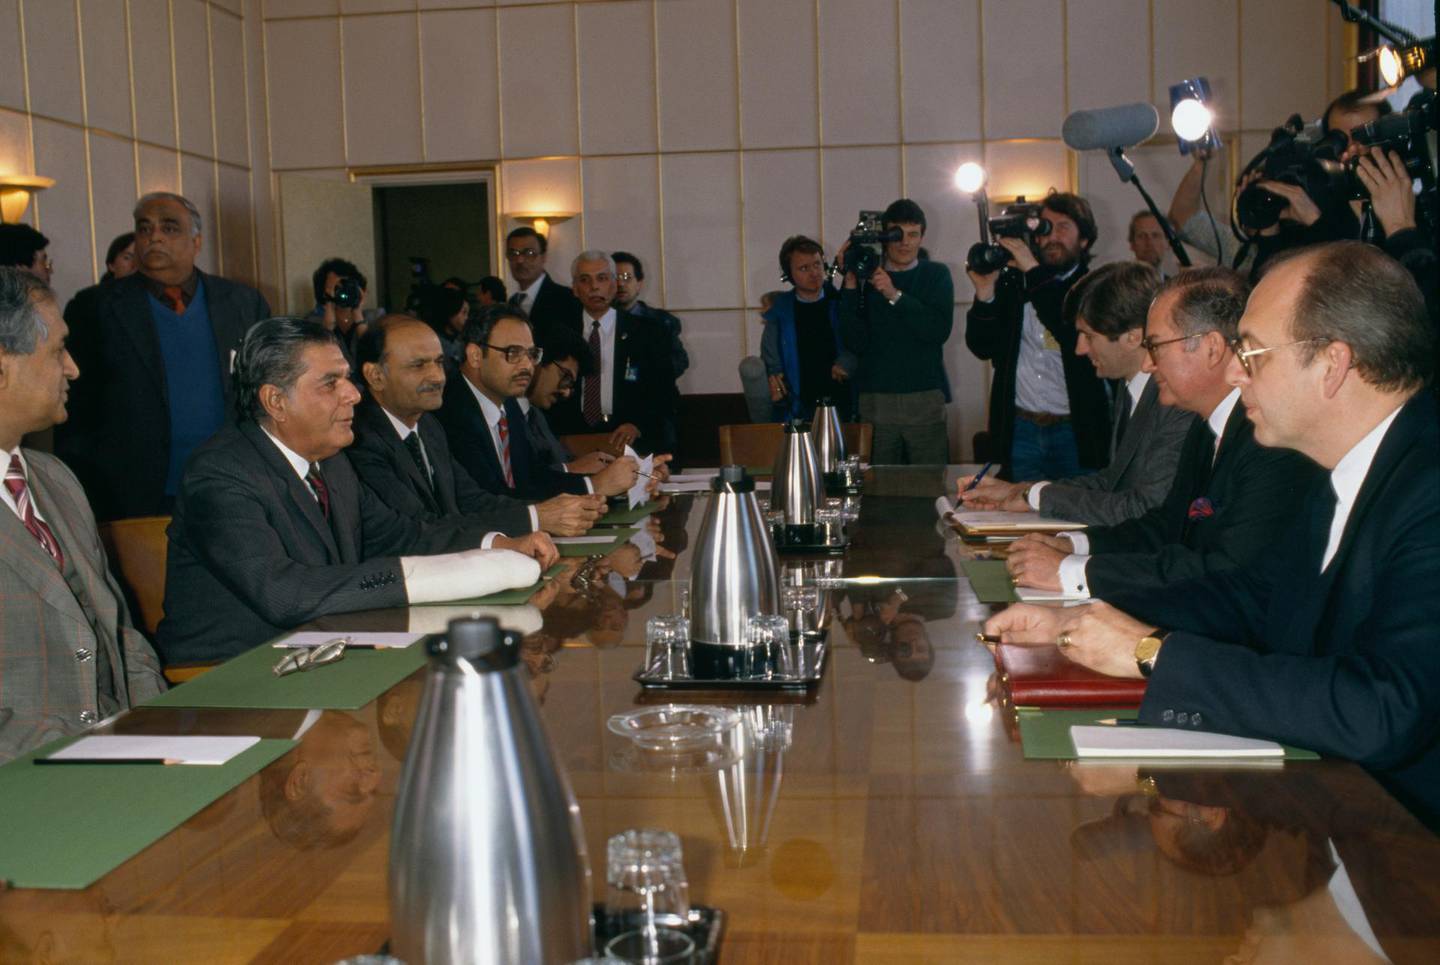 Independant speakers and journalists attend the United Nations in Geneva in March of 1988 for discussions on the war in Afghanistan. Pakistan Foreign Affairs Minister Zain Noorani (arm in plaster) was present and Special Advisor to the UN Secretary General Diego Cordovez (middle right seated) conducted the negotiations that culminated in the 1988 Geneva accords leading to the Soviet troops withdrawal from Afghanistan. (Photo by THIERRY ORBAN/Sygma via Getty Images)